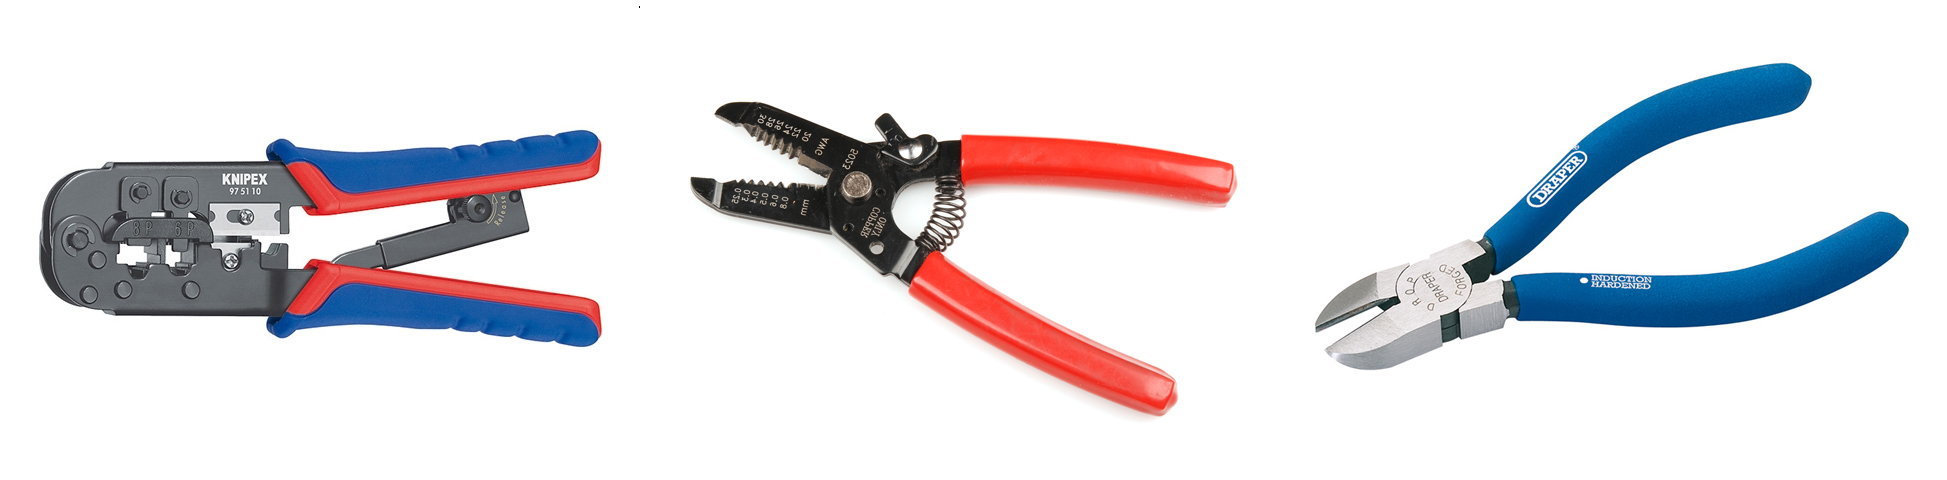 Crimping pliers (left), wire stripper (center) and side-cutters (right).